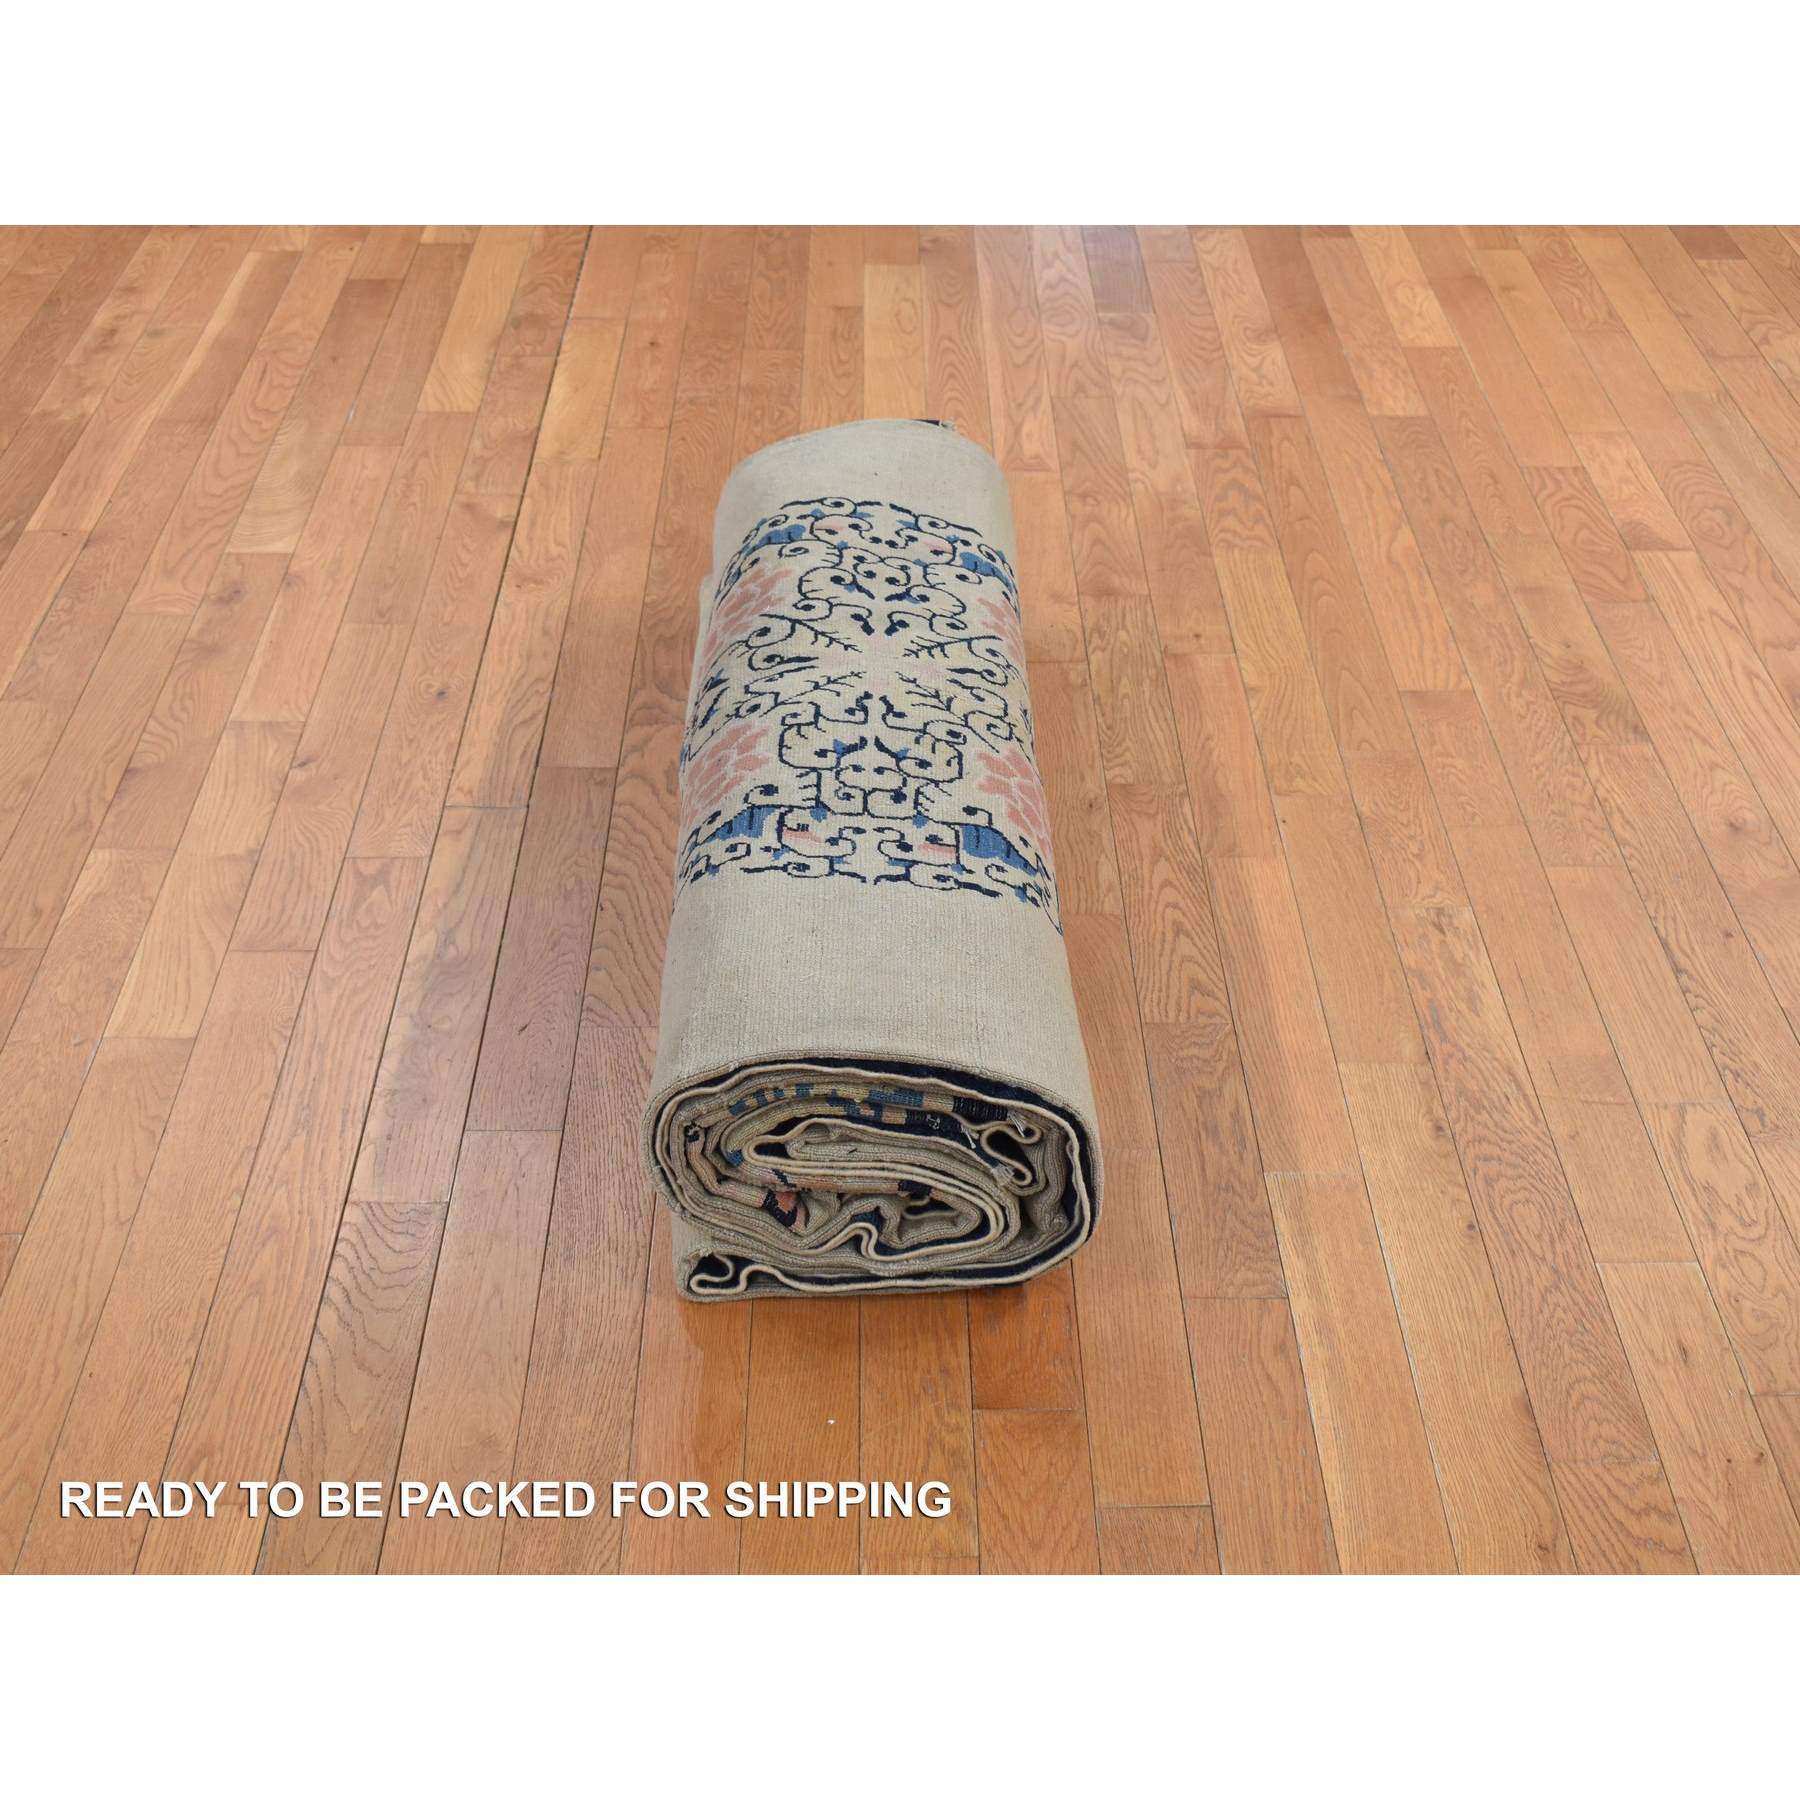 Antique-Hand-Knotted-Rug-390545